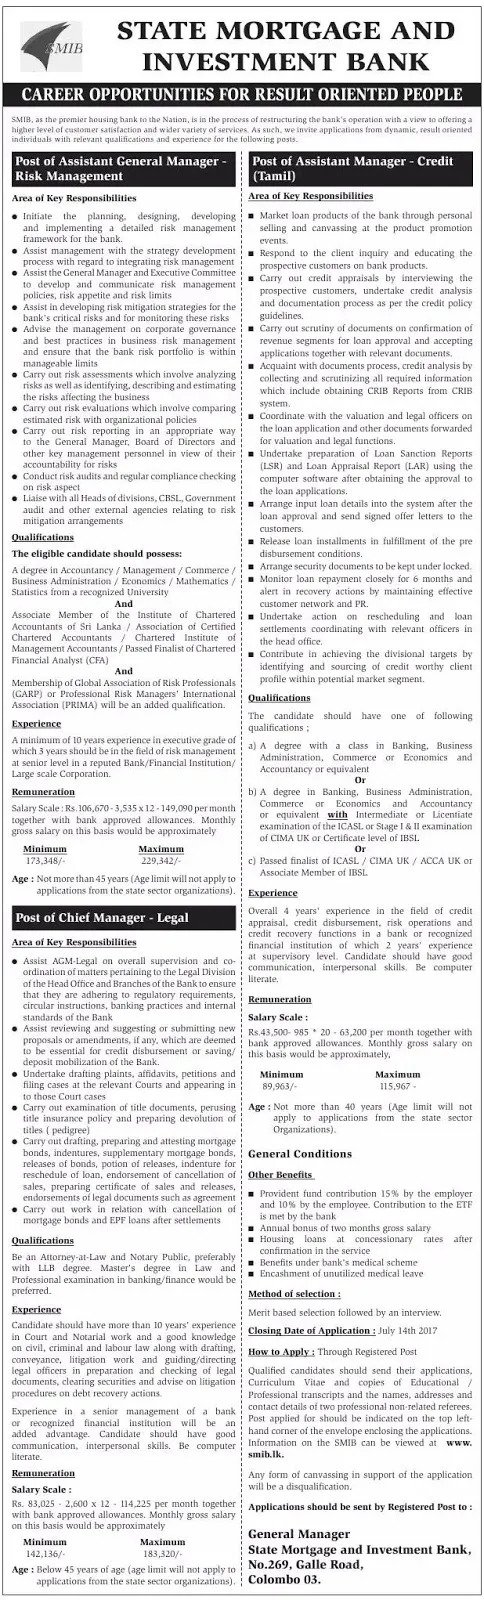 State Mortgage & Investment Bank Vacancies